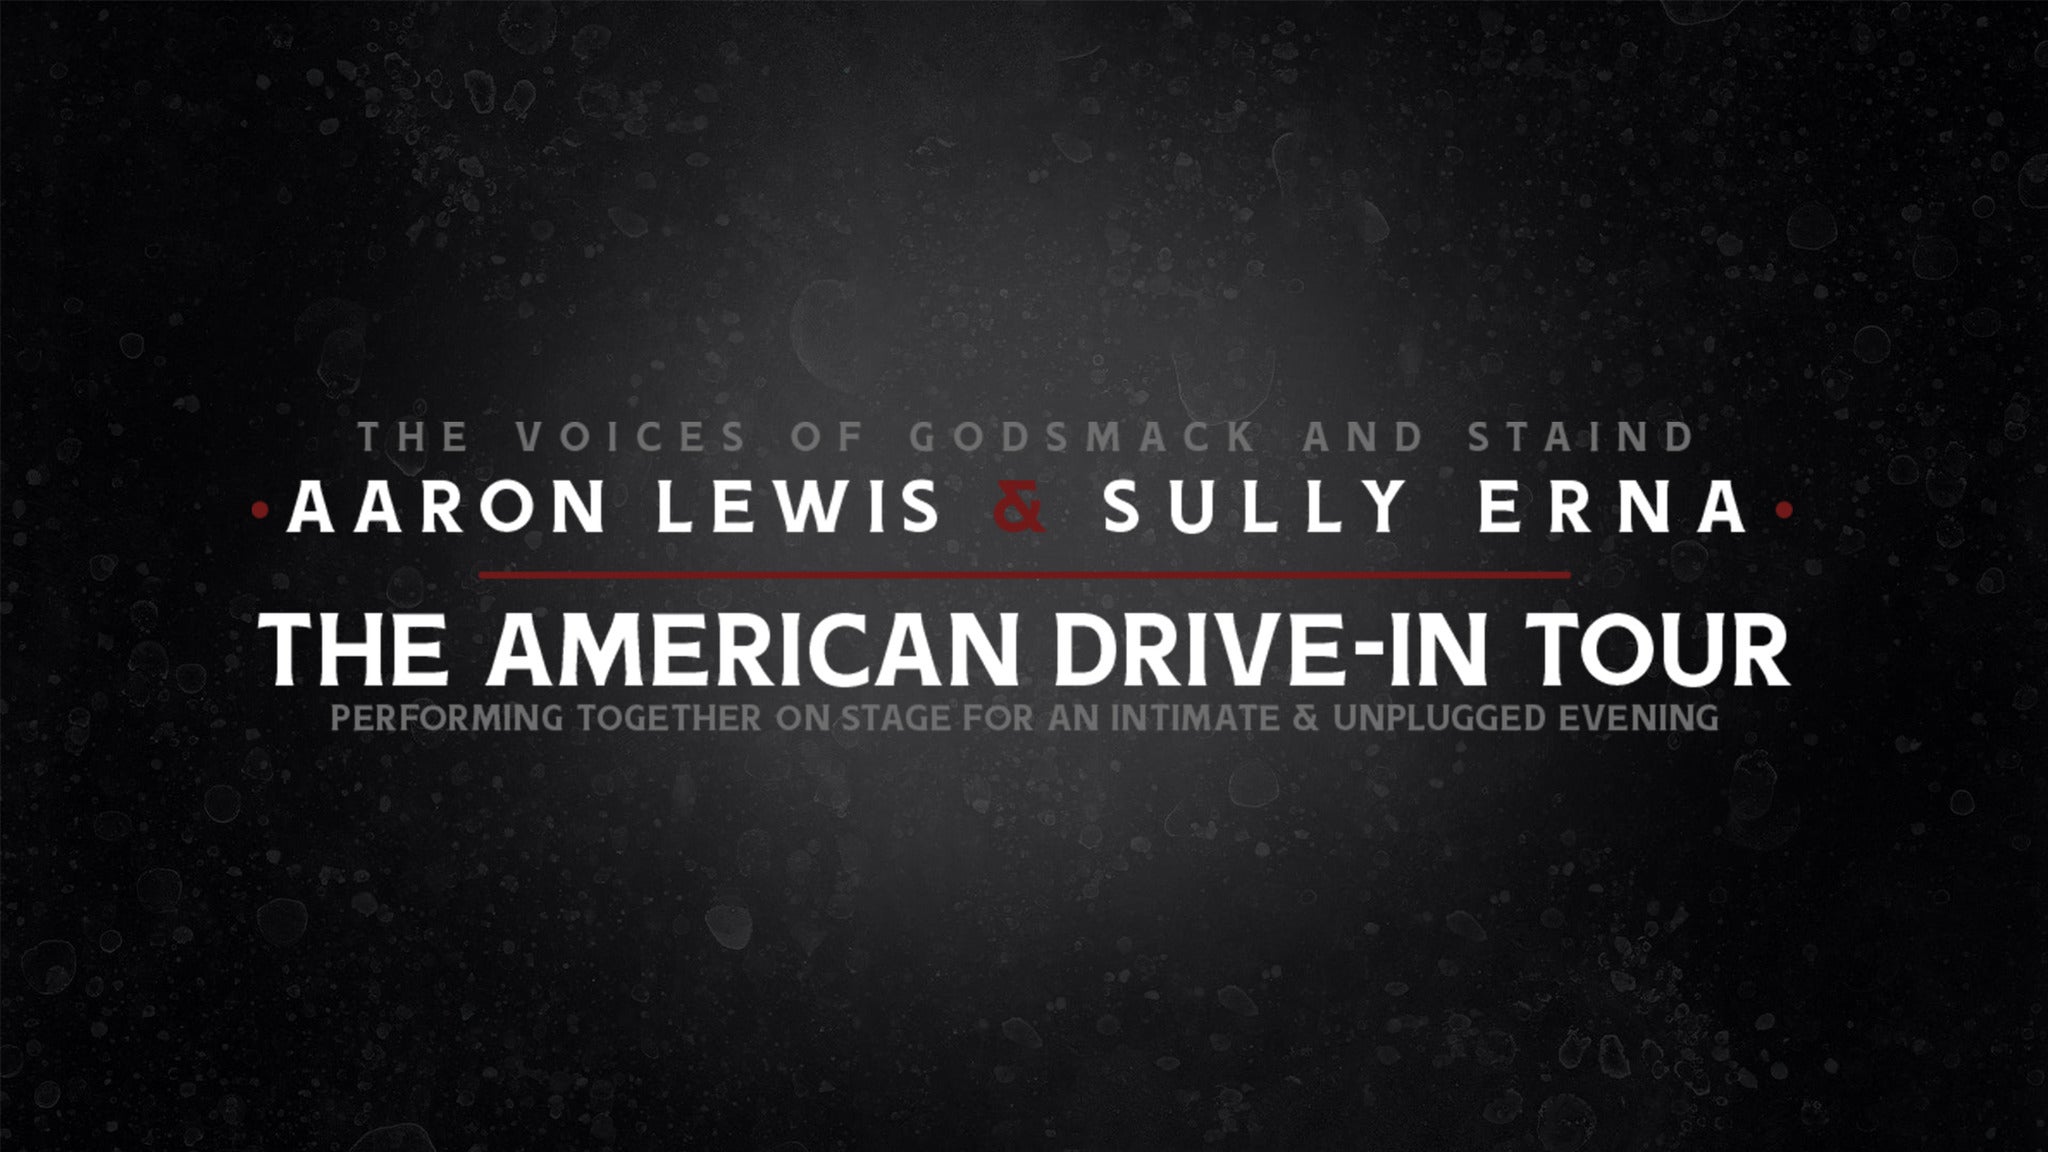 Aaron Lewis &amp; Sully Erna, The American Drive-In Tour presale information on freepresalepasswords.com